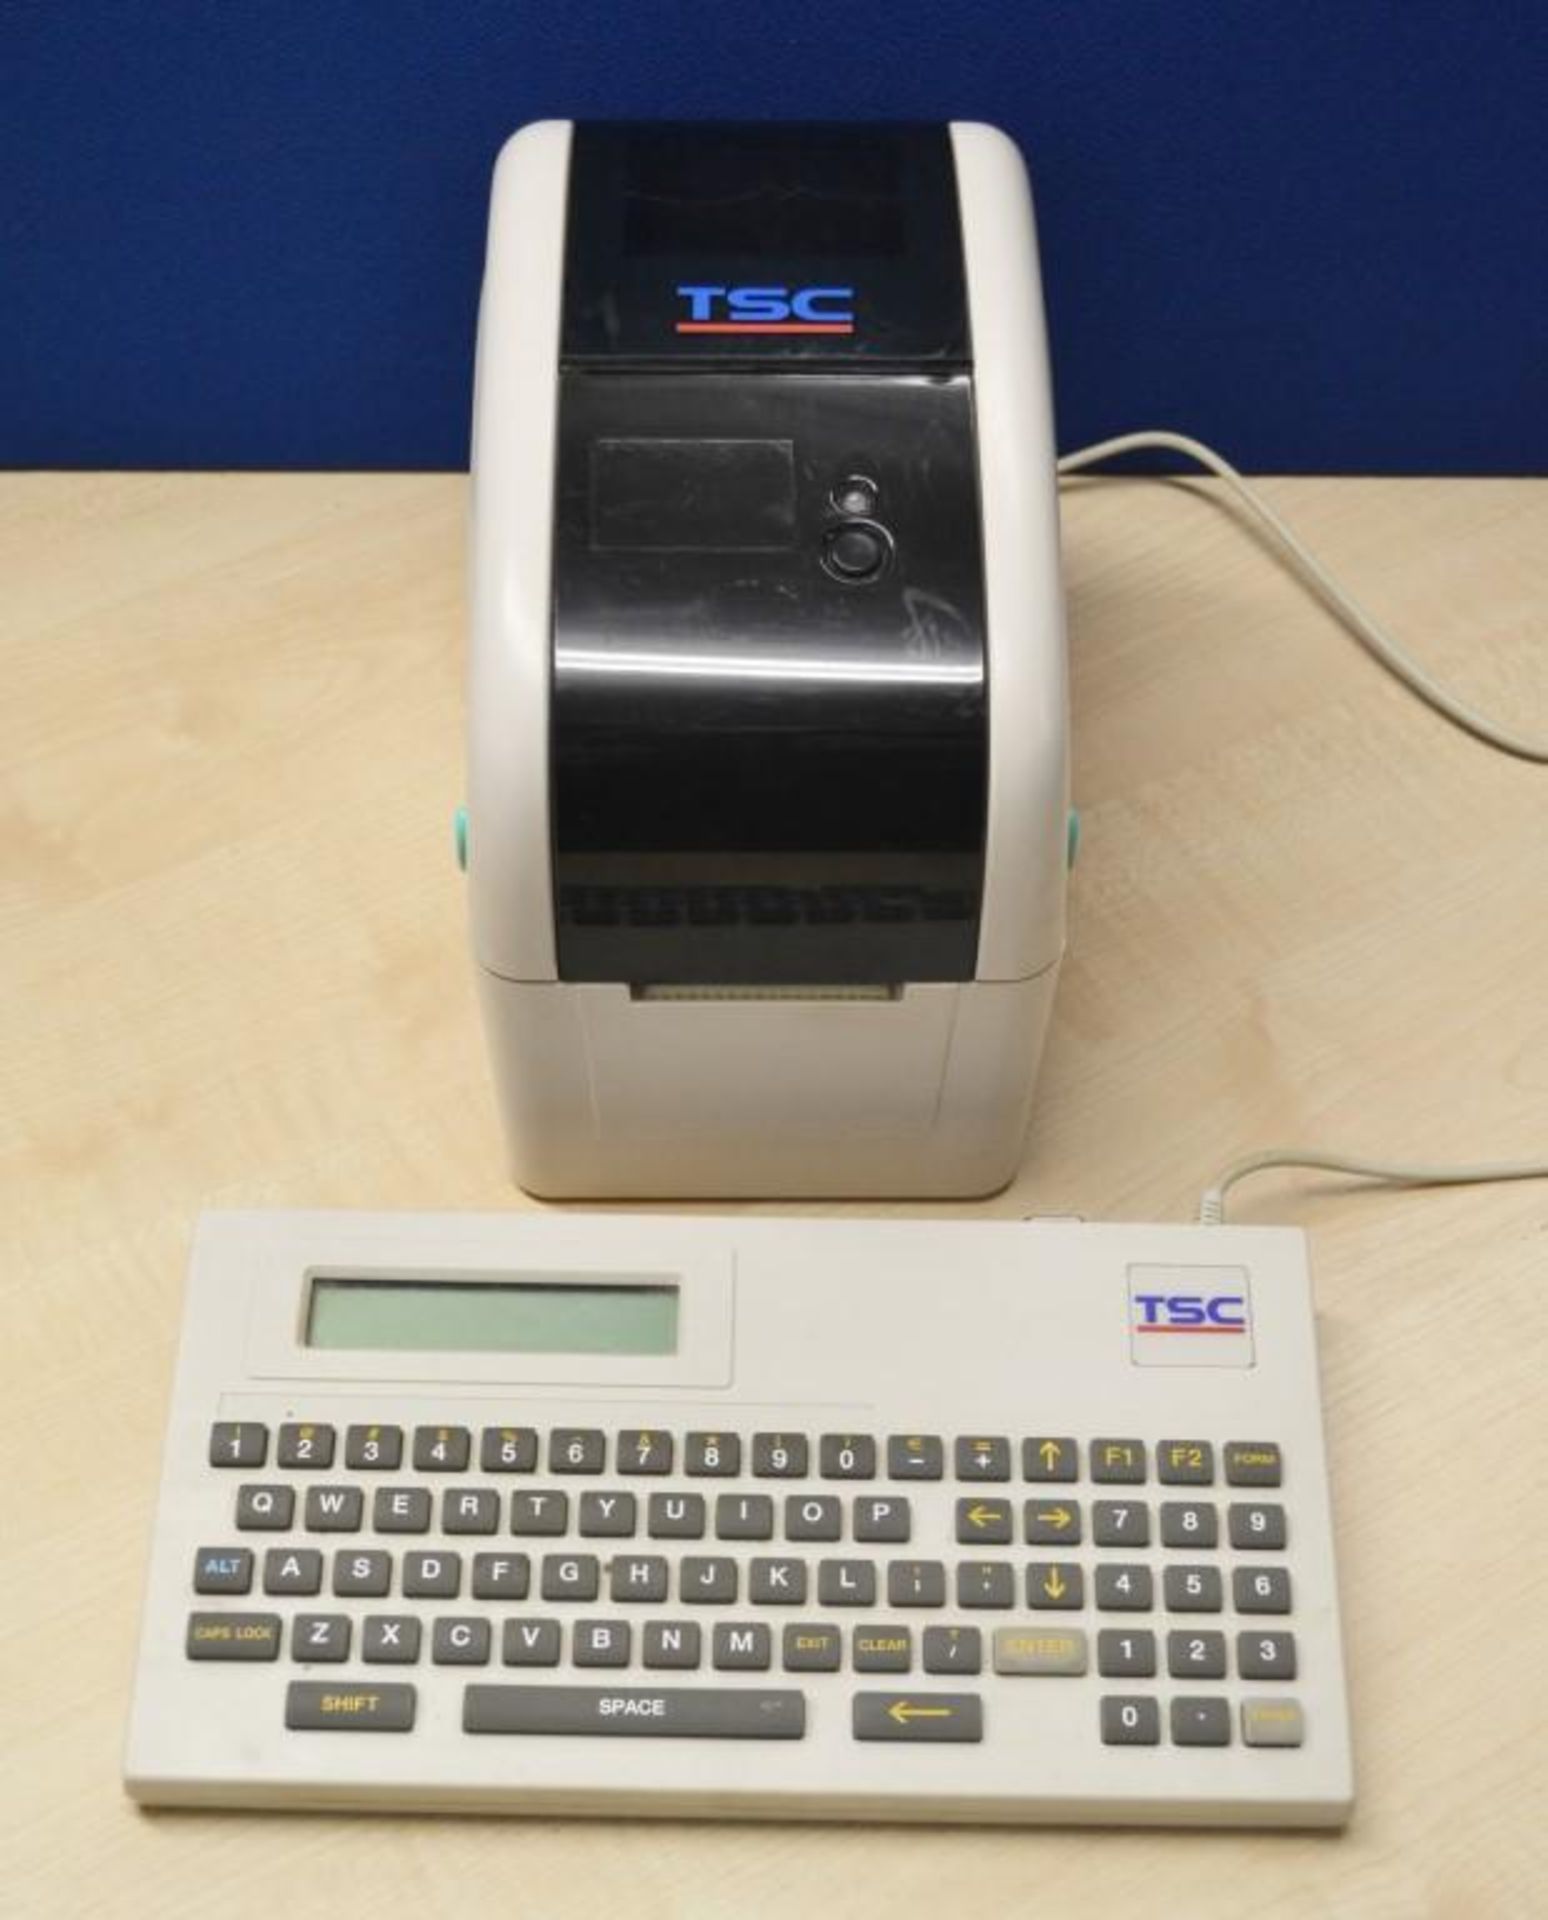 1 x TSC Thermal Desktop Label / Sticker Printer (Model: TTP-225) - Includes Keyboard - Recently Remo